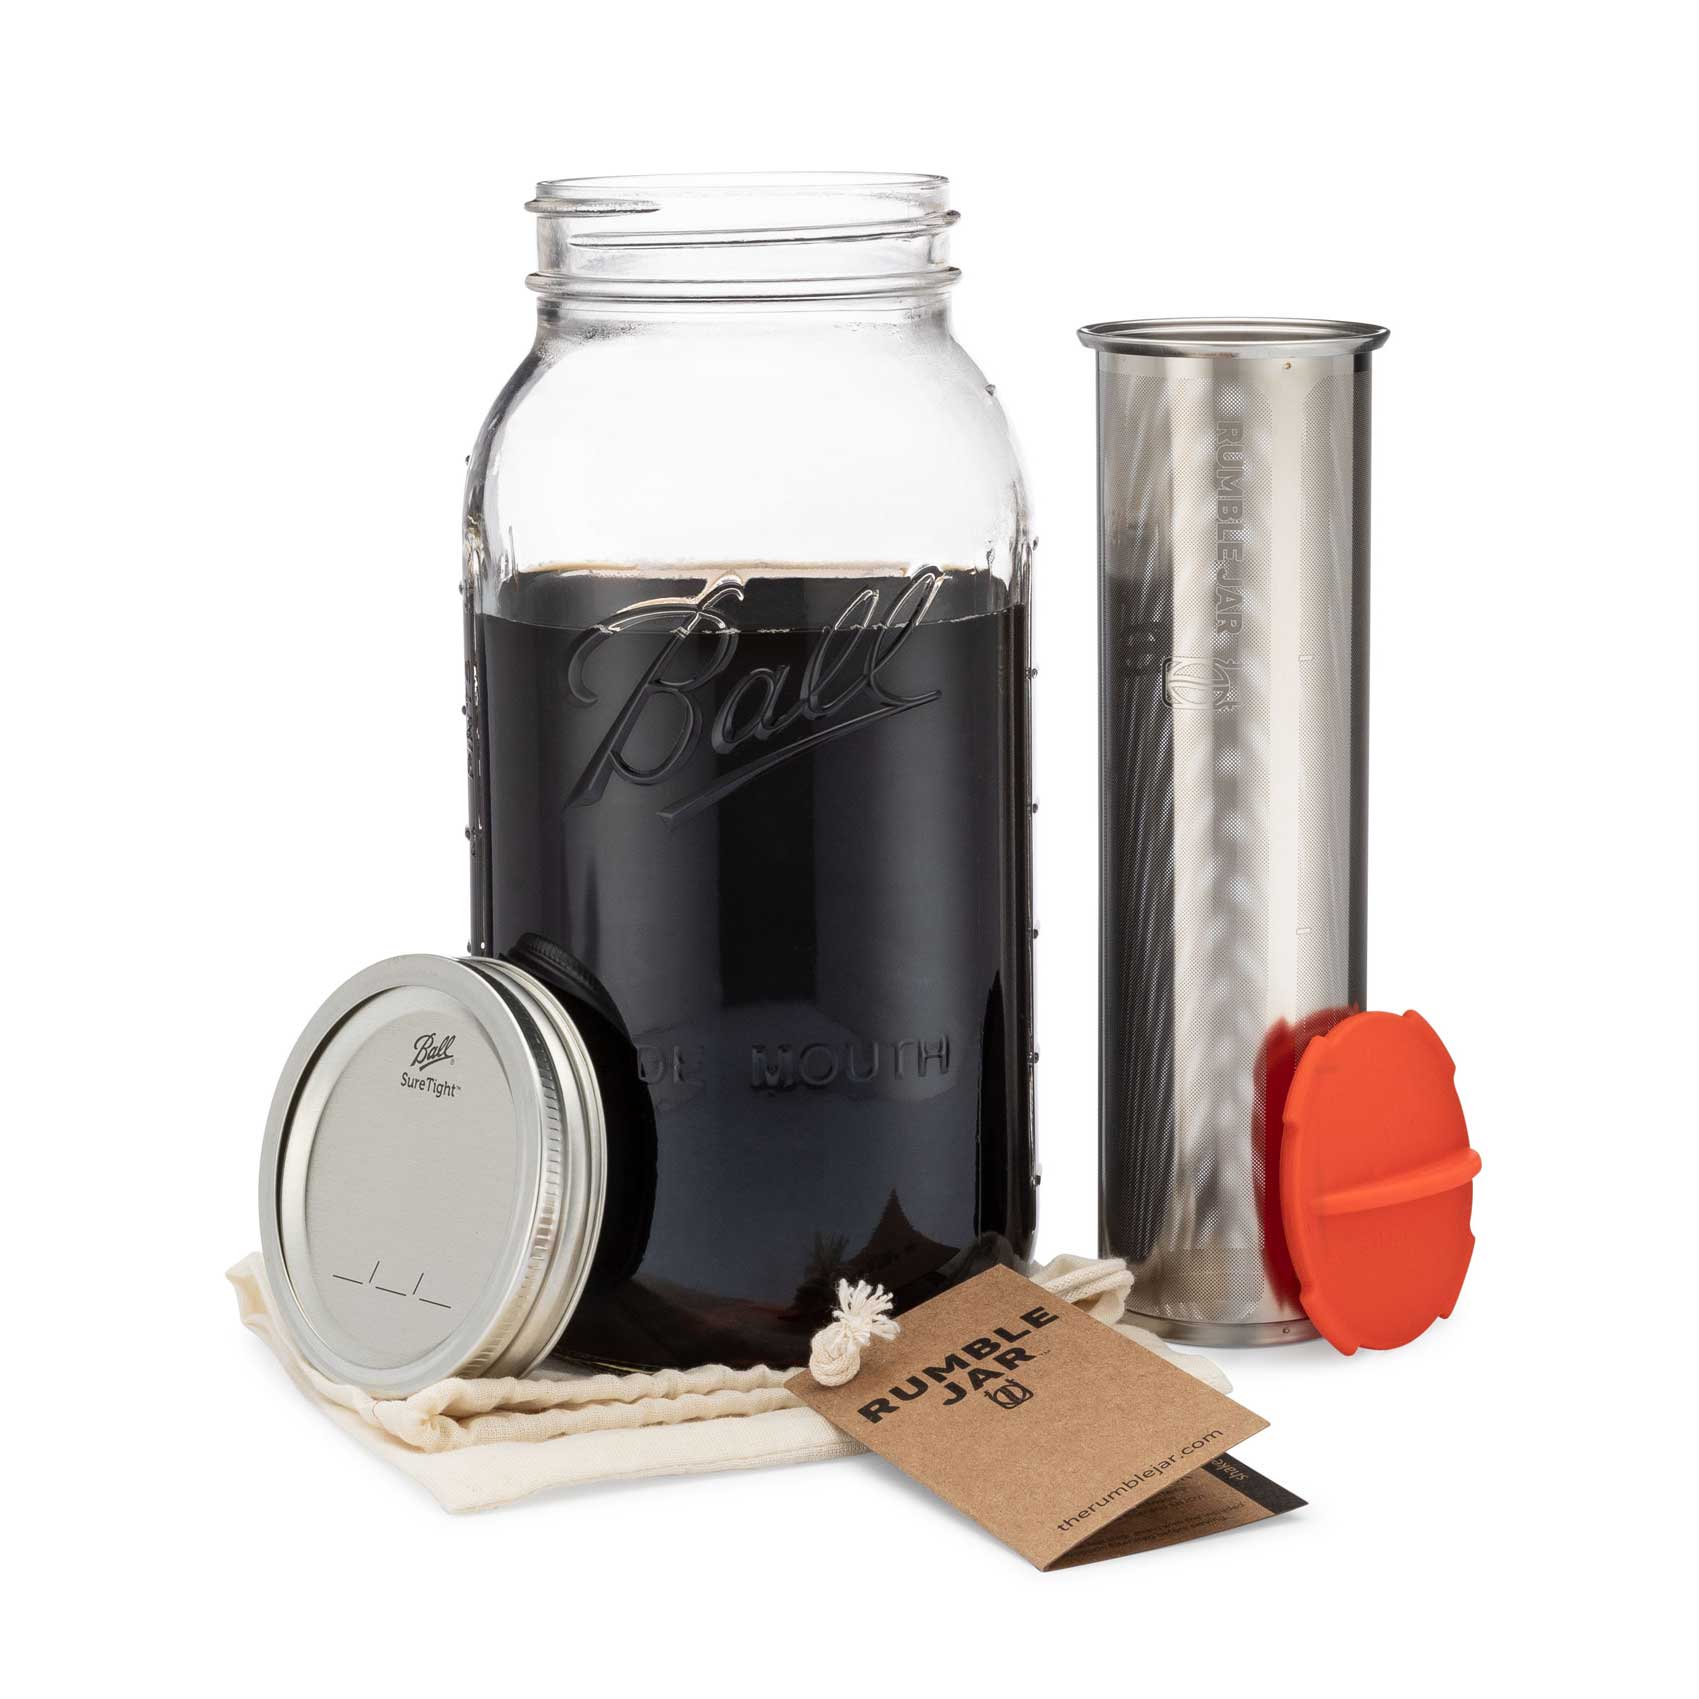 Rumble Jar half gallon 64 ounce cold brew coffee filter with orangey-red cap cotton filter sock and hangtag next to a Mason jar